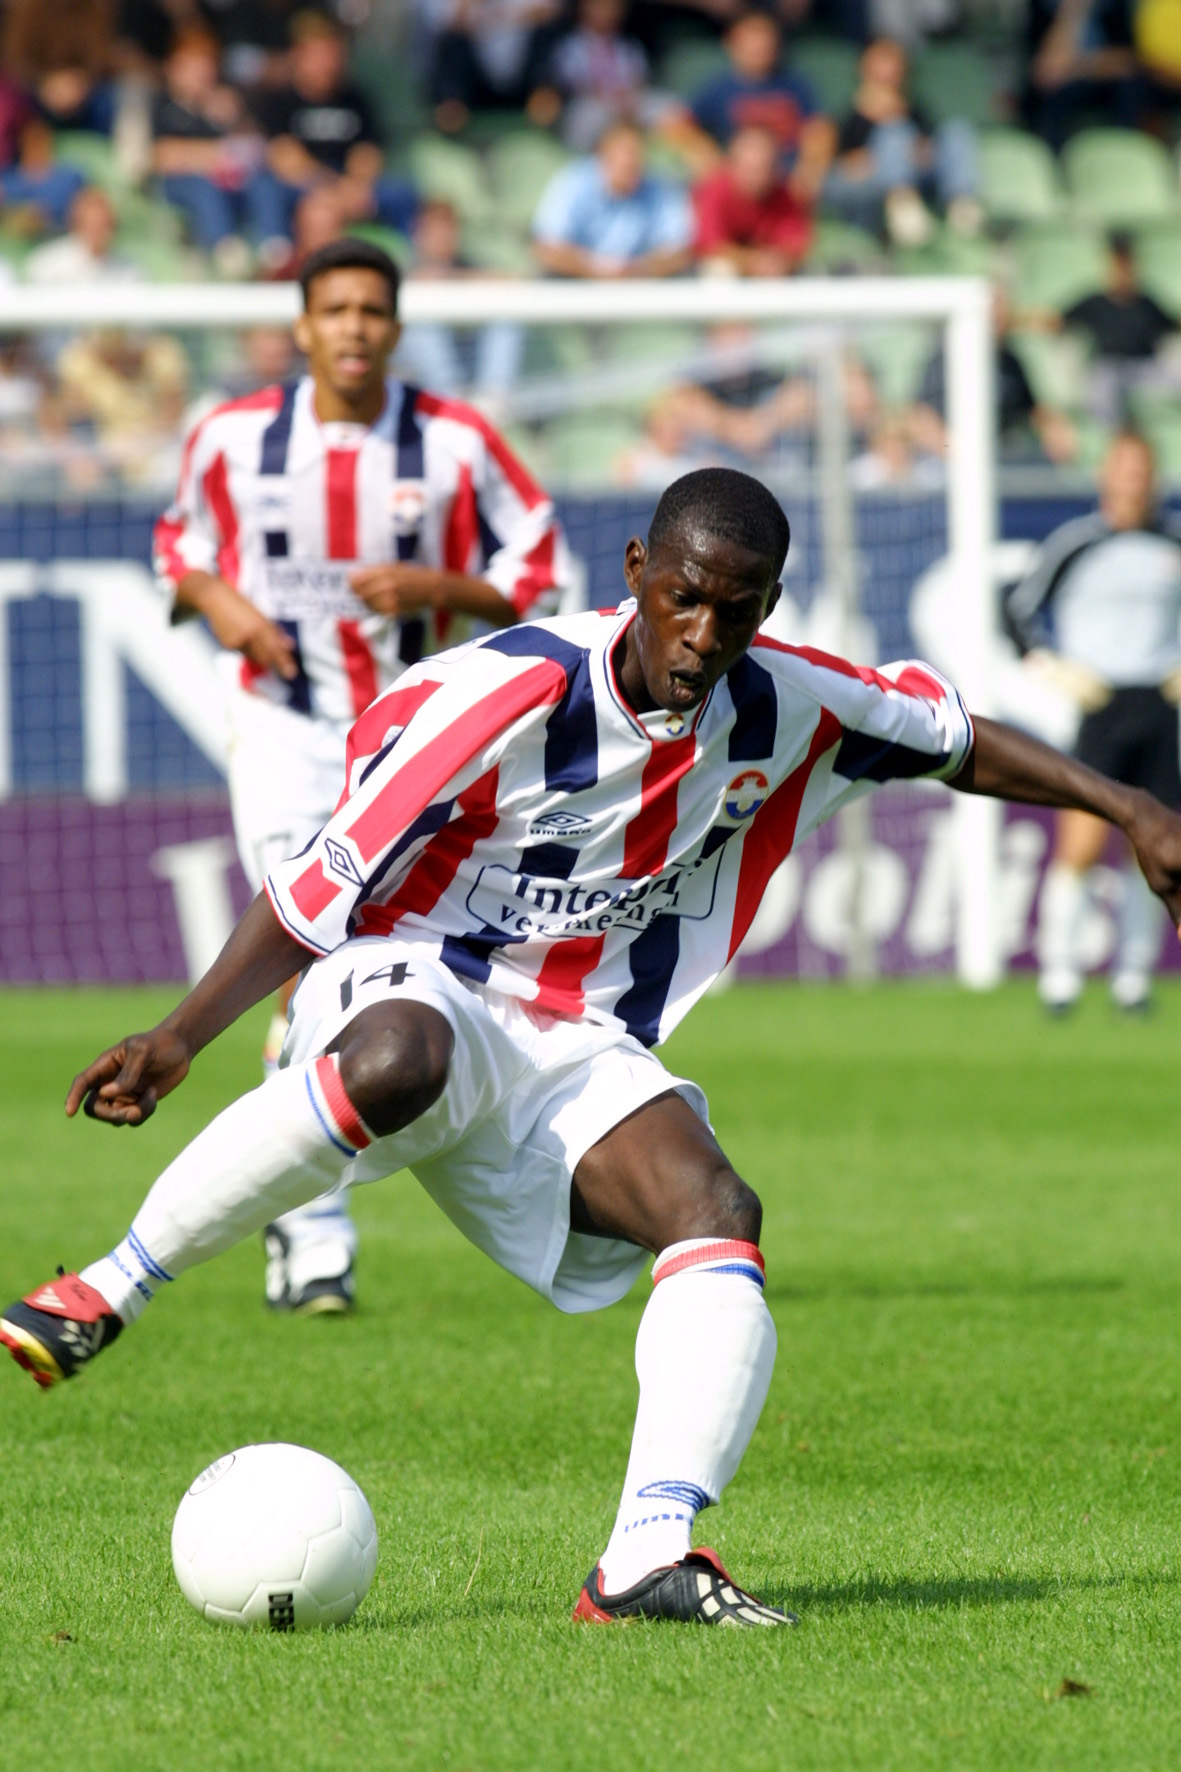 Jatto Ceesay of Willem II in action